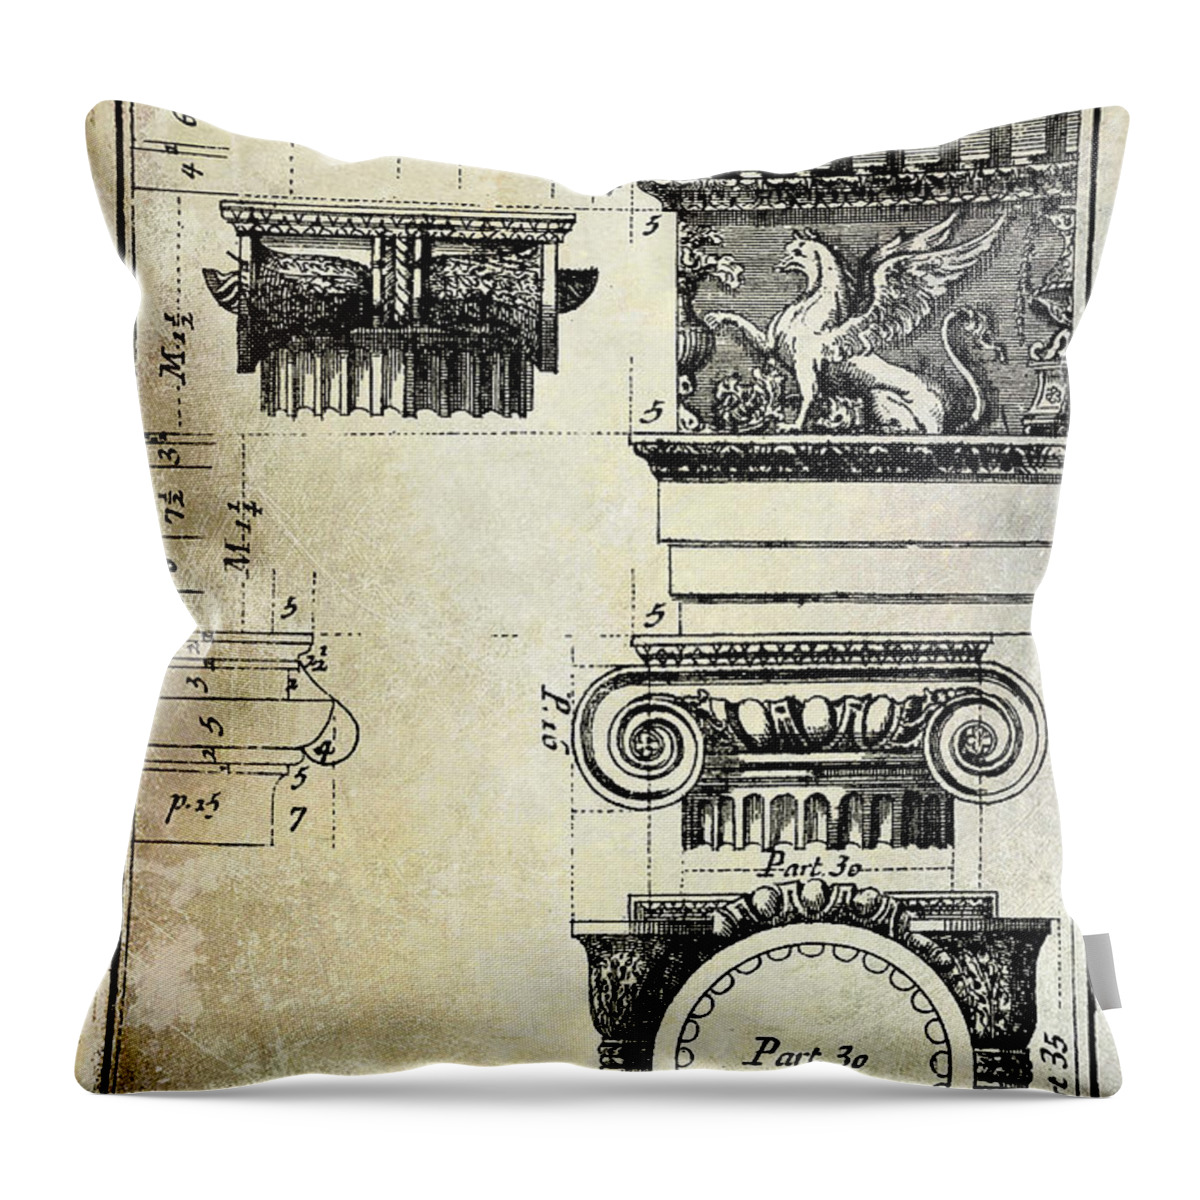 Ionic Capital Throw Pillow featuring the drawing Ionic capitol by Jon Neidert